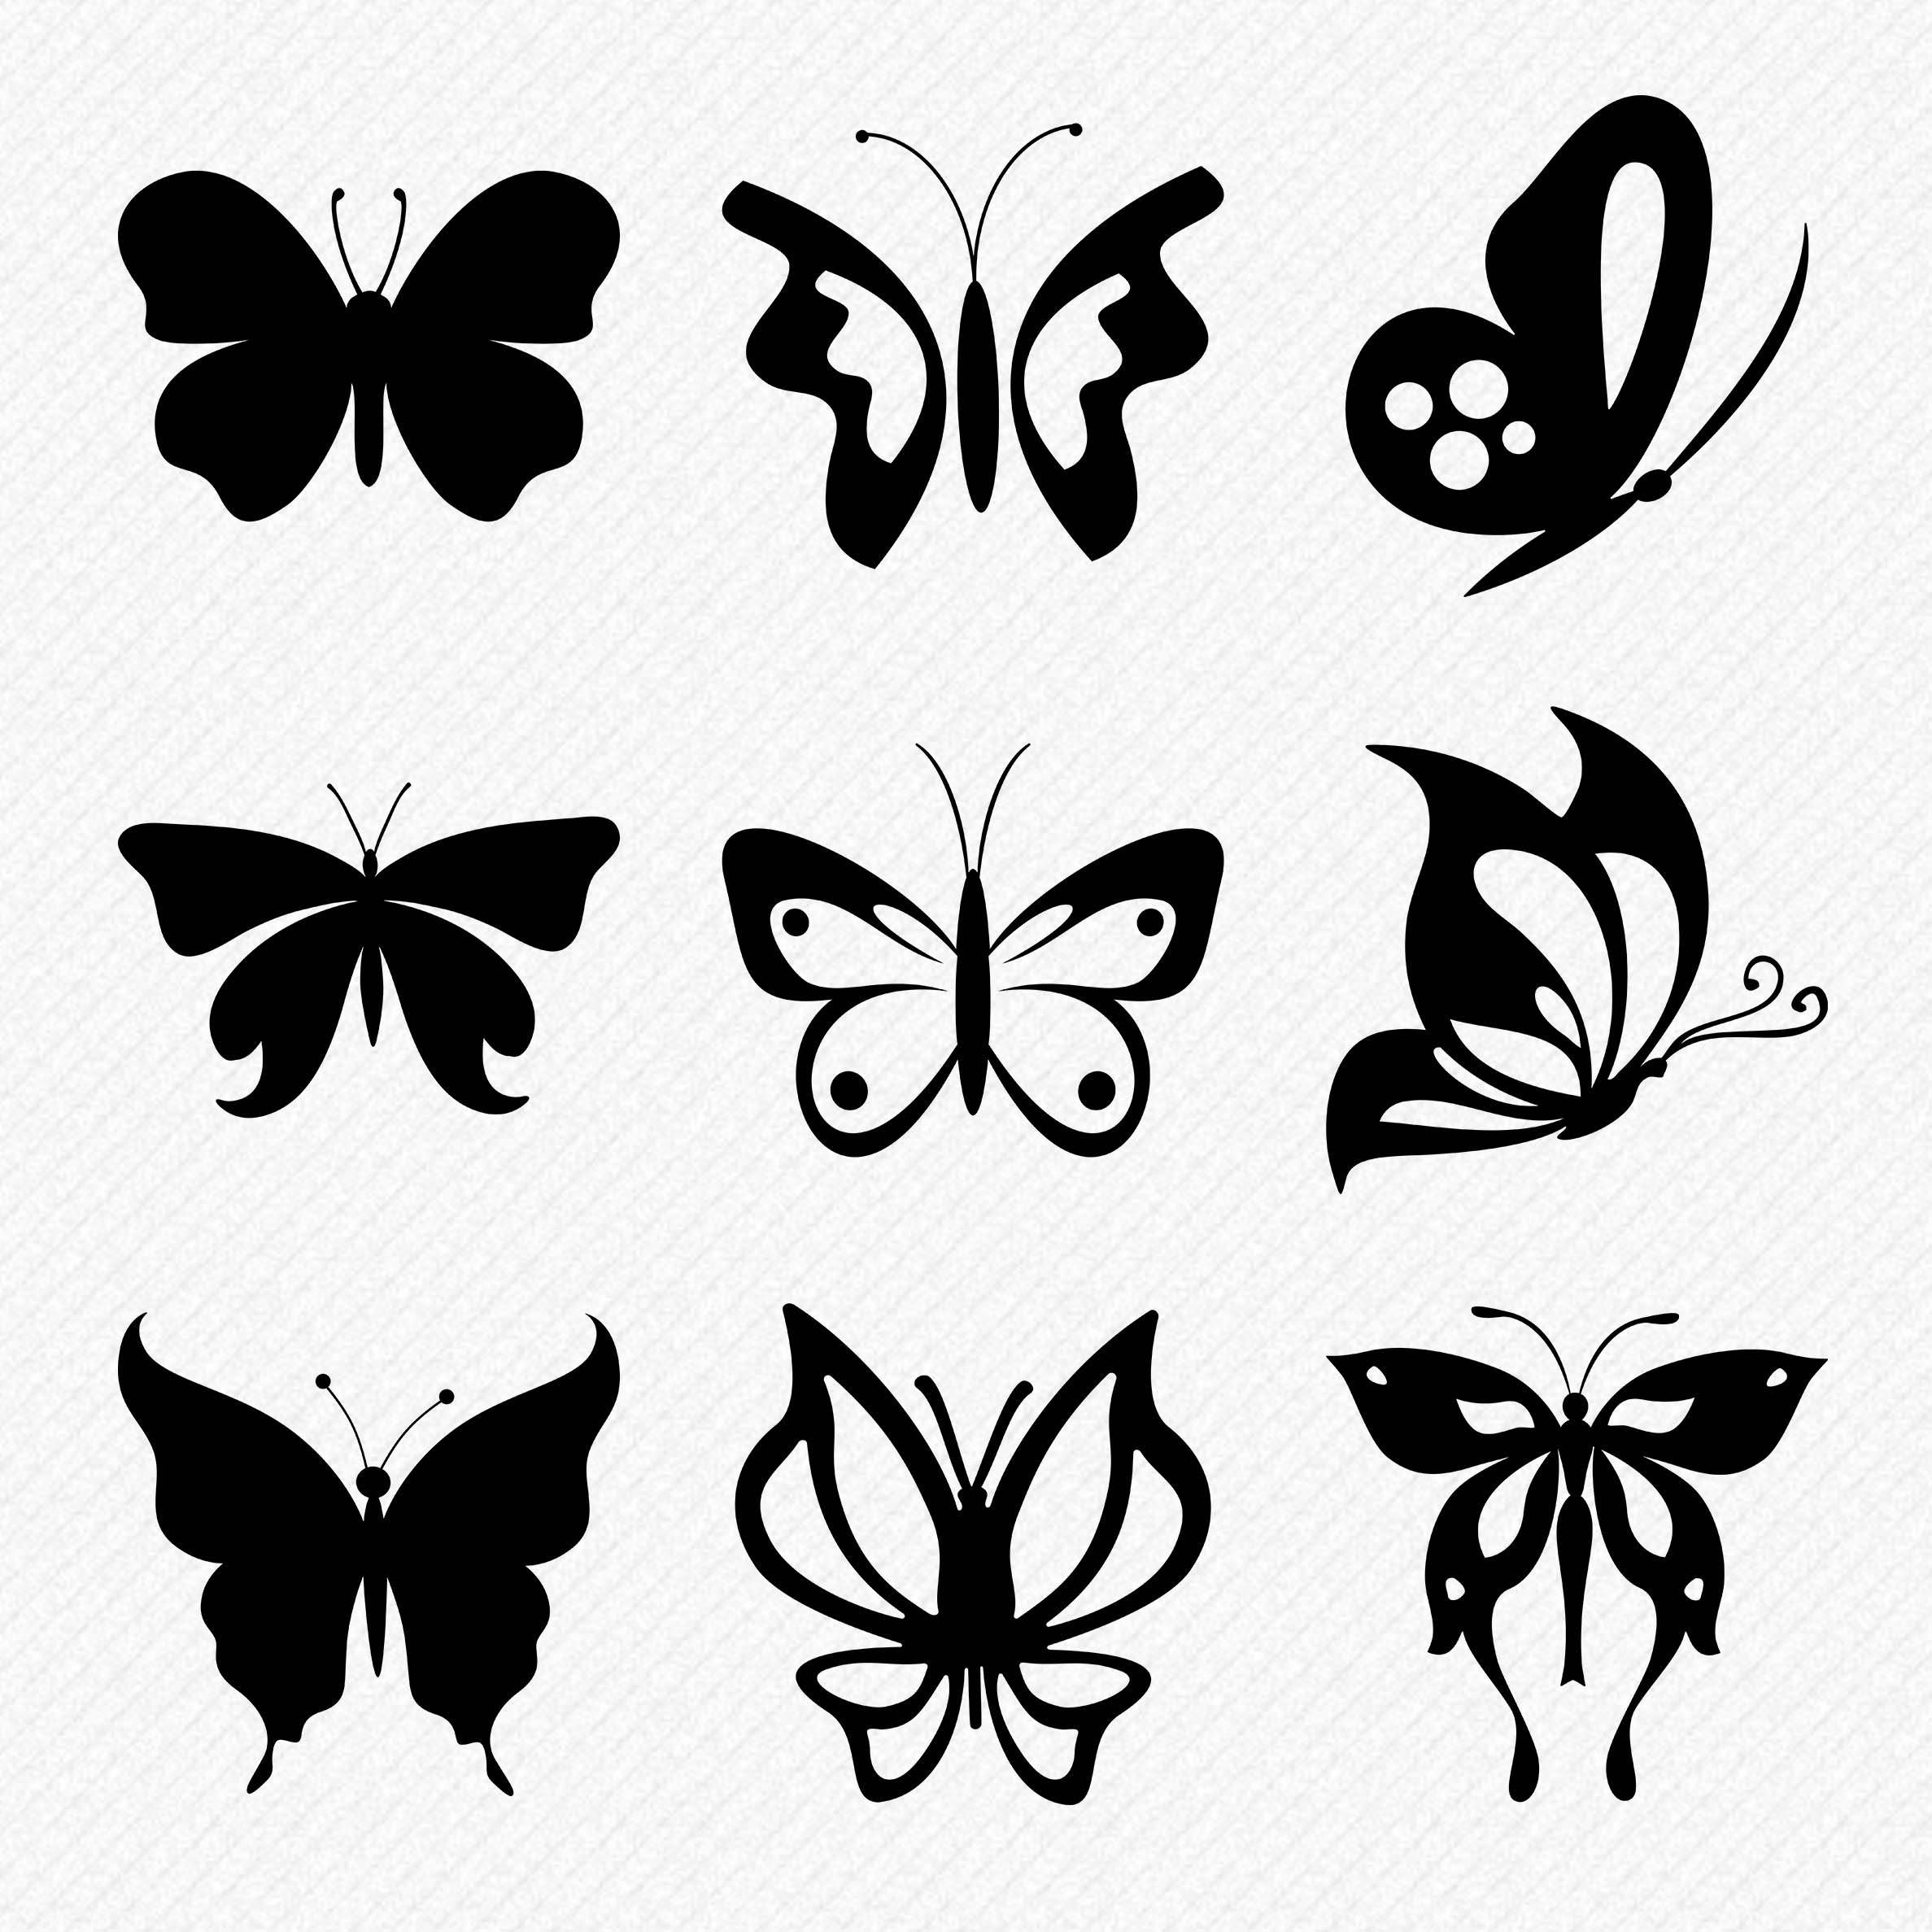 Download Butterfly Silhouette Tattoo Designs Arm Tattoo Sites